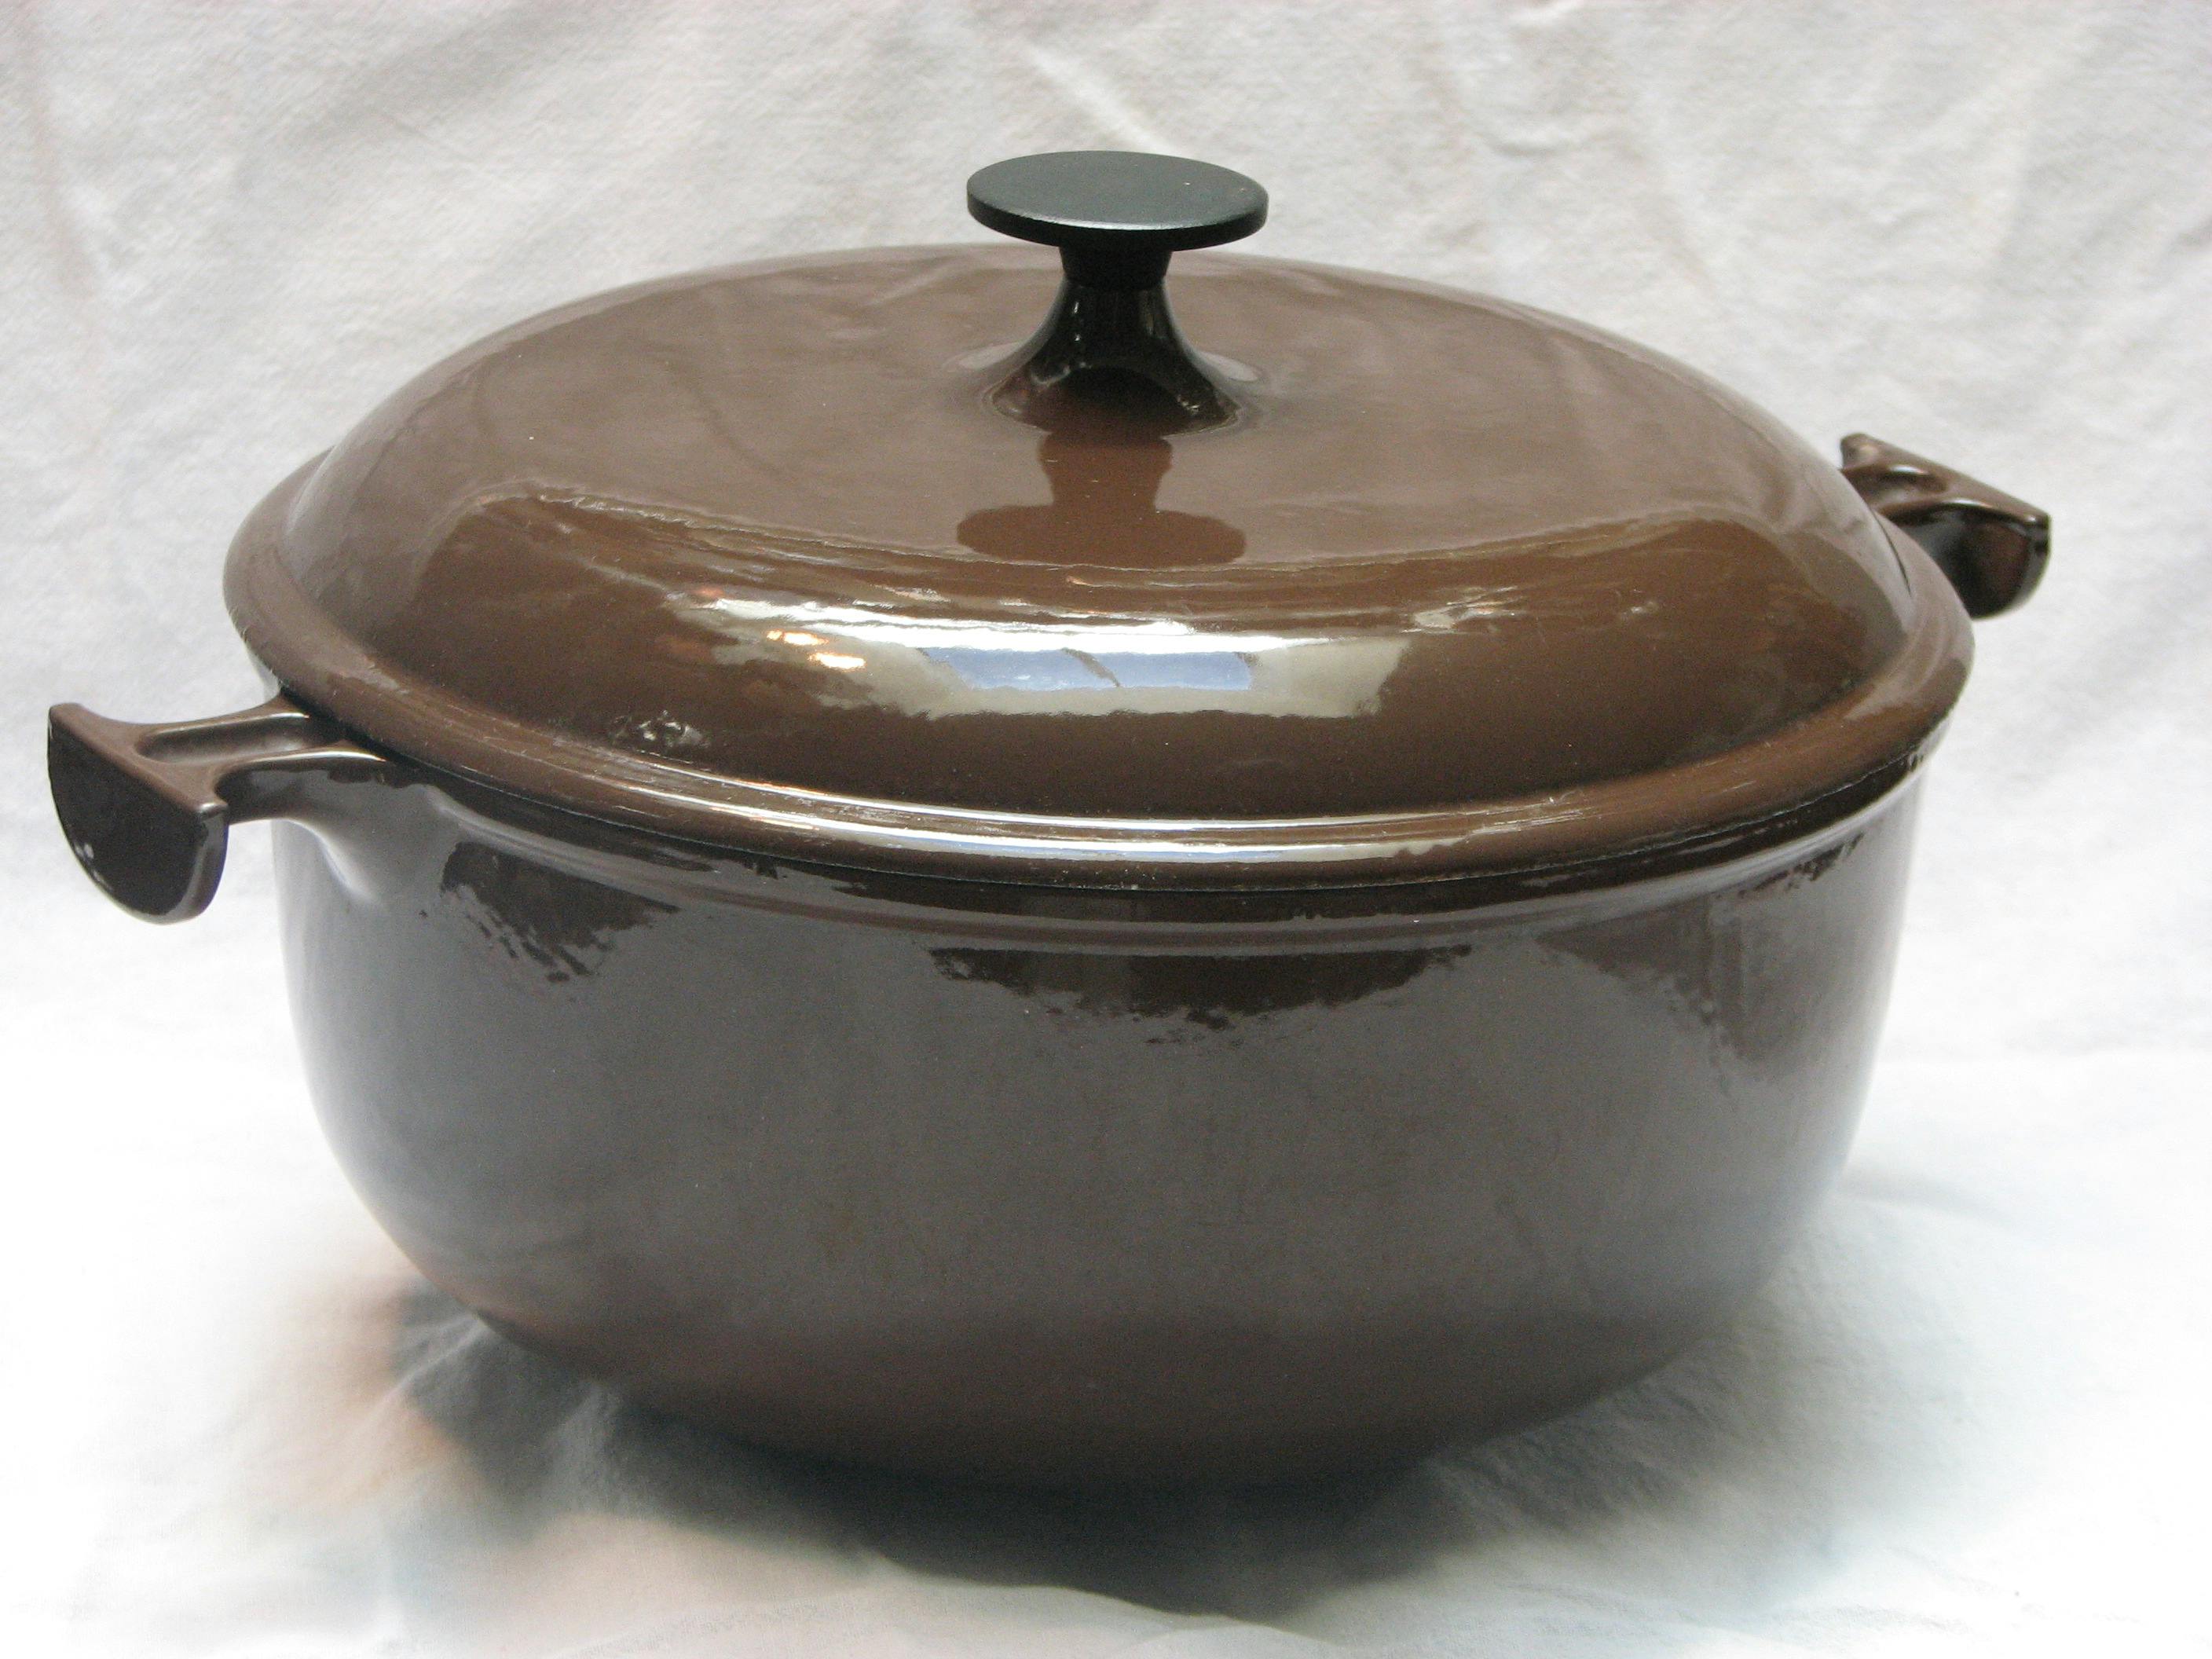 Le Creuset french/dutch oven from the La Mama line.